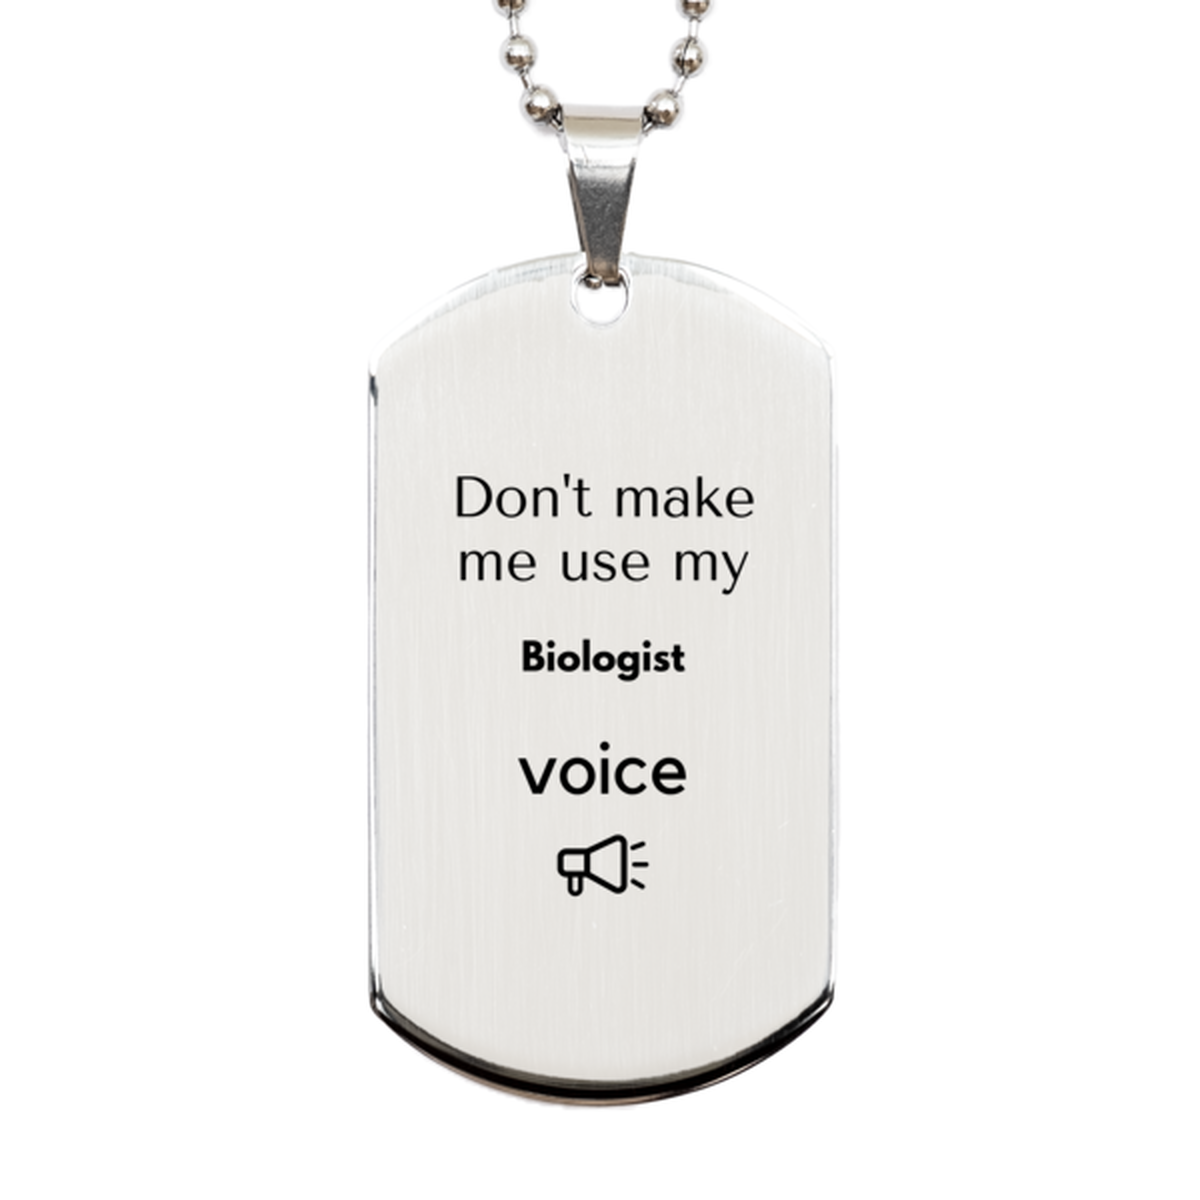 Don't make me use my Biologist voice, Sarcasm Biologist Gifts, Christmas Biologist Silver Dog Tag Birthday Unique Gifts For Biologist Coworkers, Men, Women, Colleague, Friends